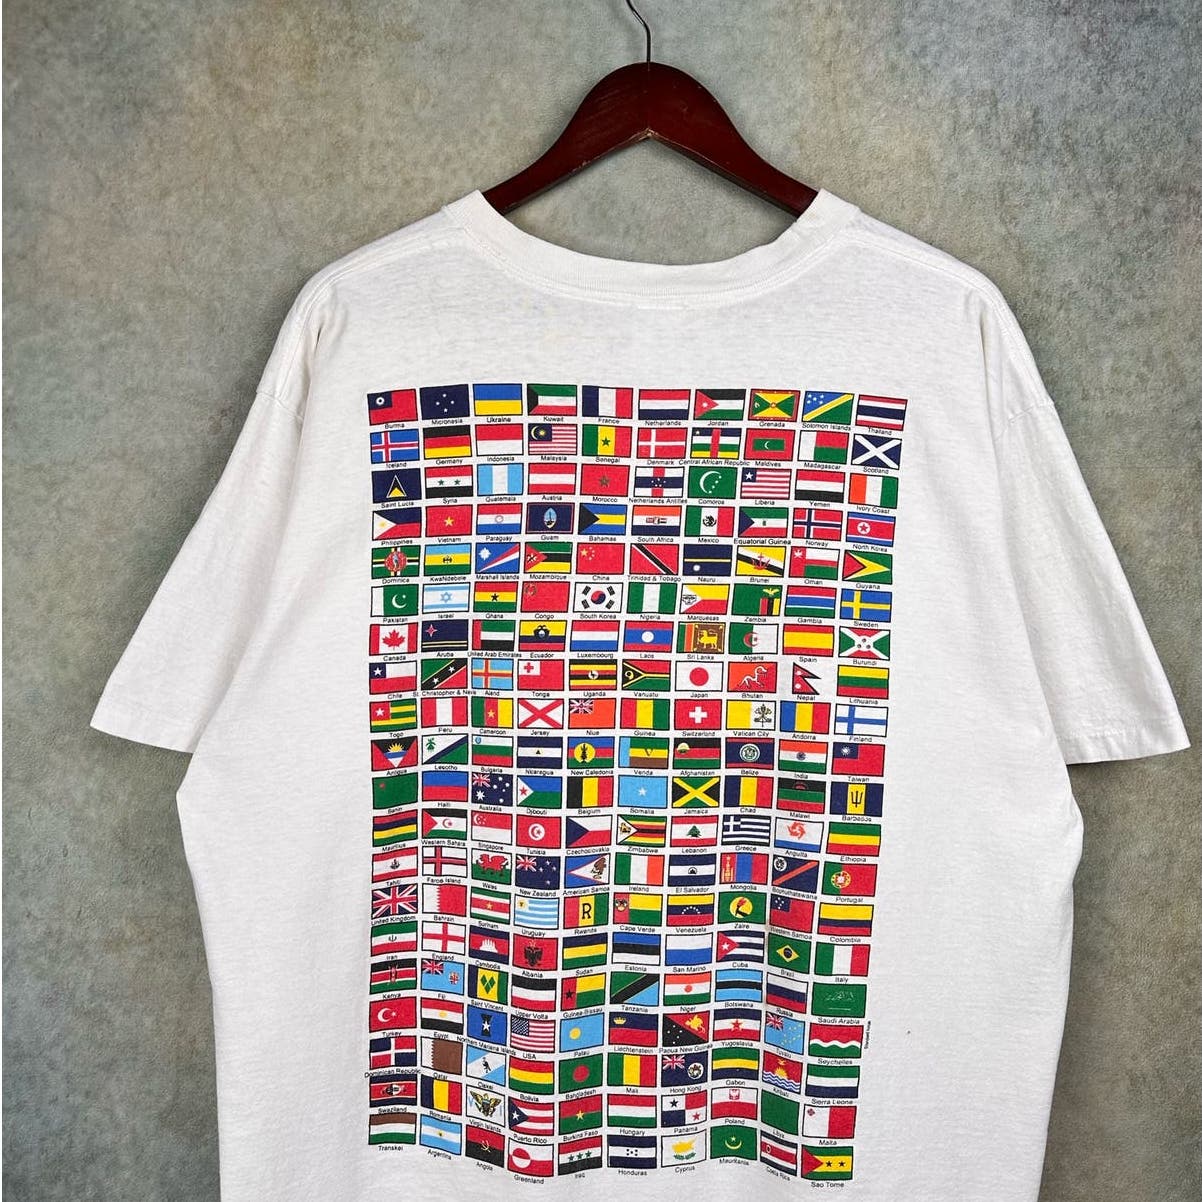 Vintage 90s World Flags Graphic T Shirt XXL